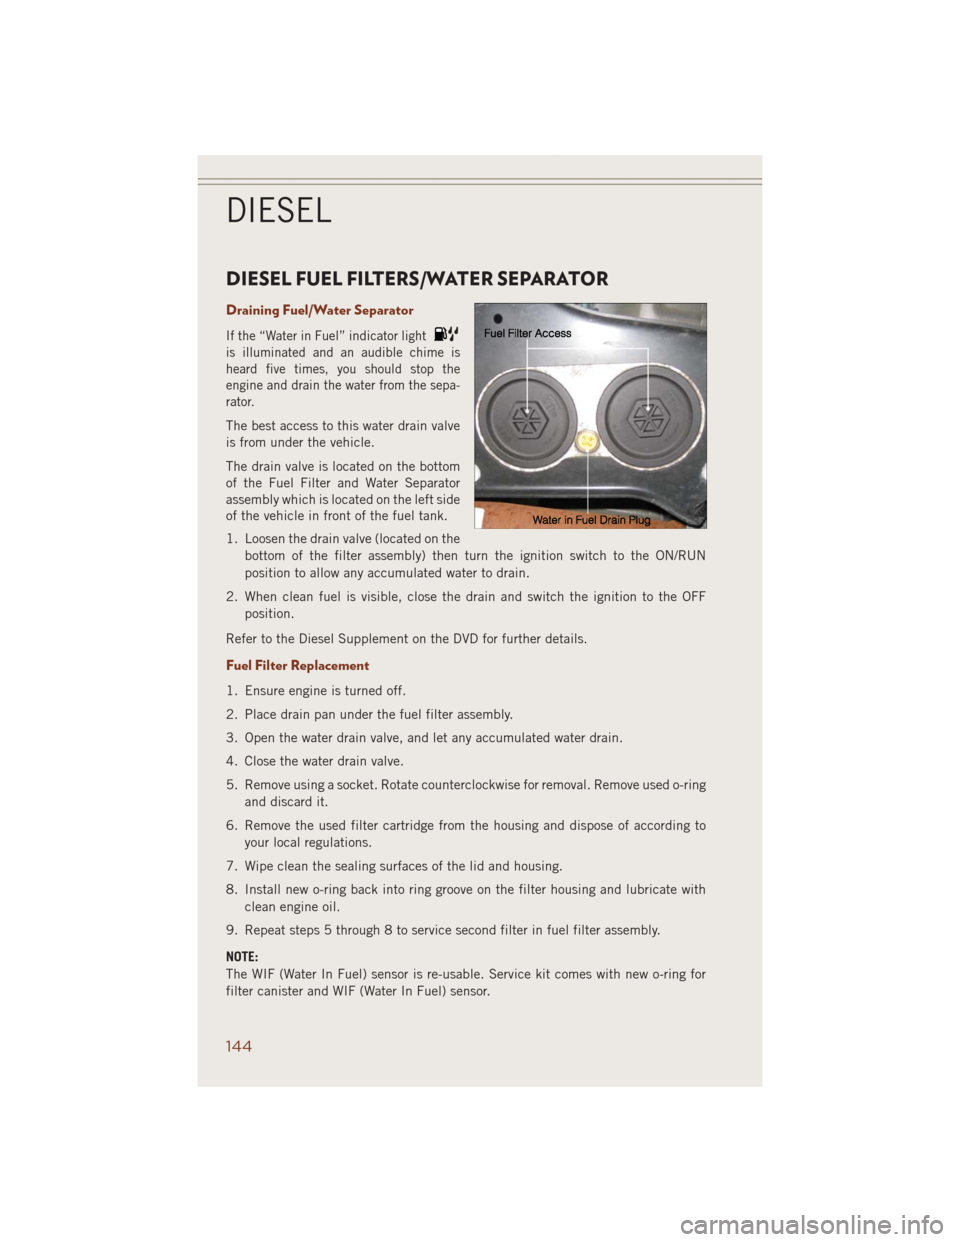 JEEP GRAND CHEROKEE 2014 WK2 / 4.G Owners Manual DIESEL FUEL FILTERS/WATER SEPARATOR
Draining Fuel/Water Separator
If the “Water in Fuel” indicator light
is illuminated and an audible chime is
heard five times, you should stop the
engine and dra